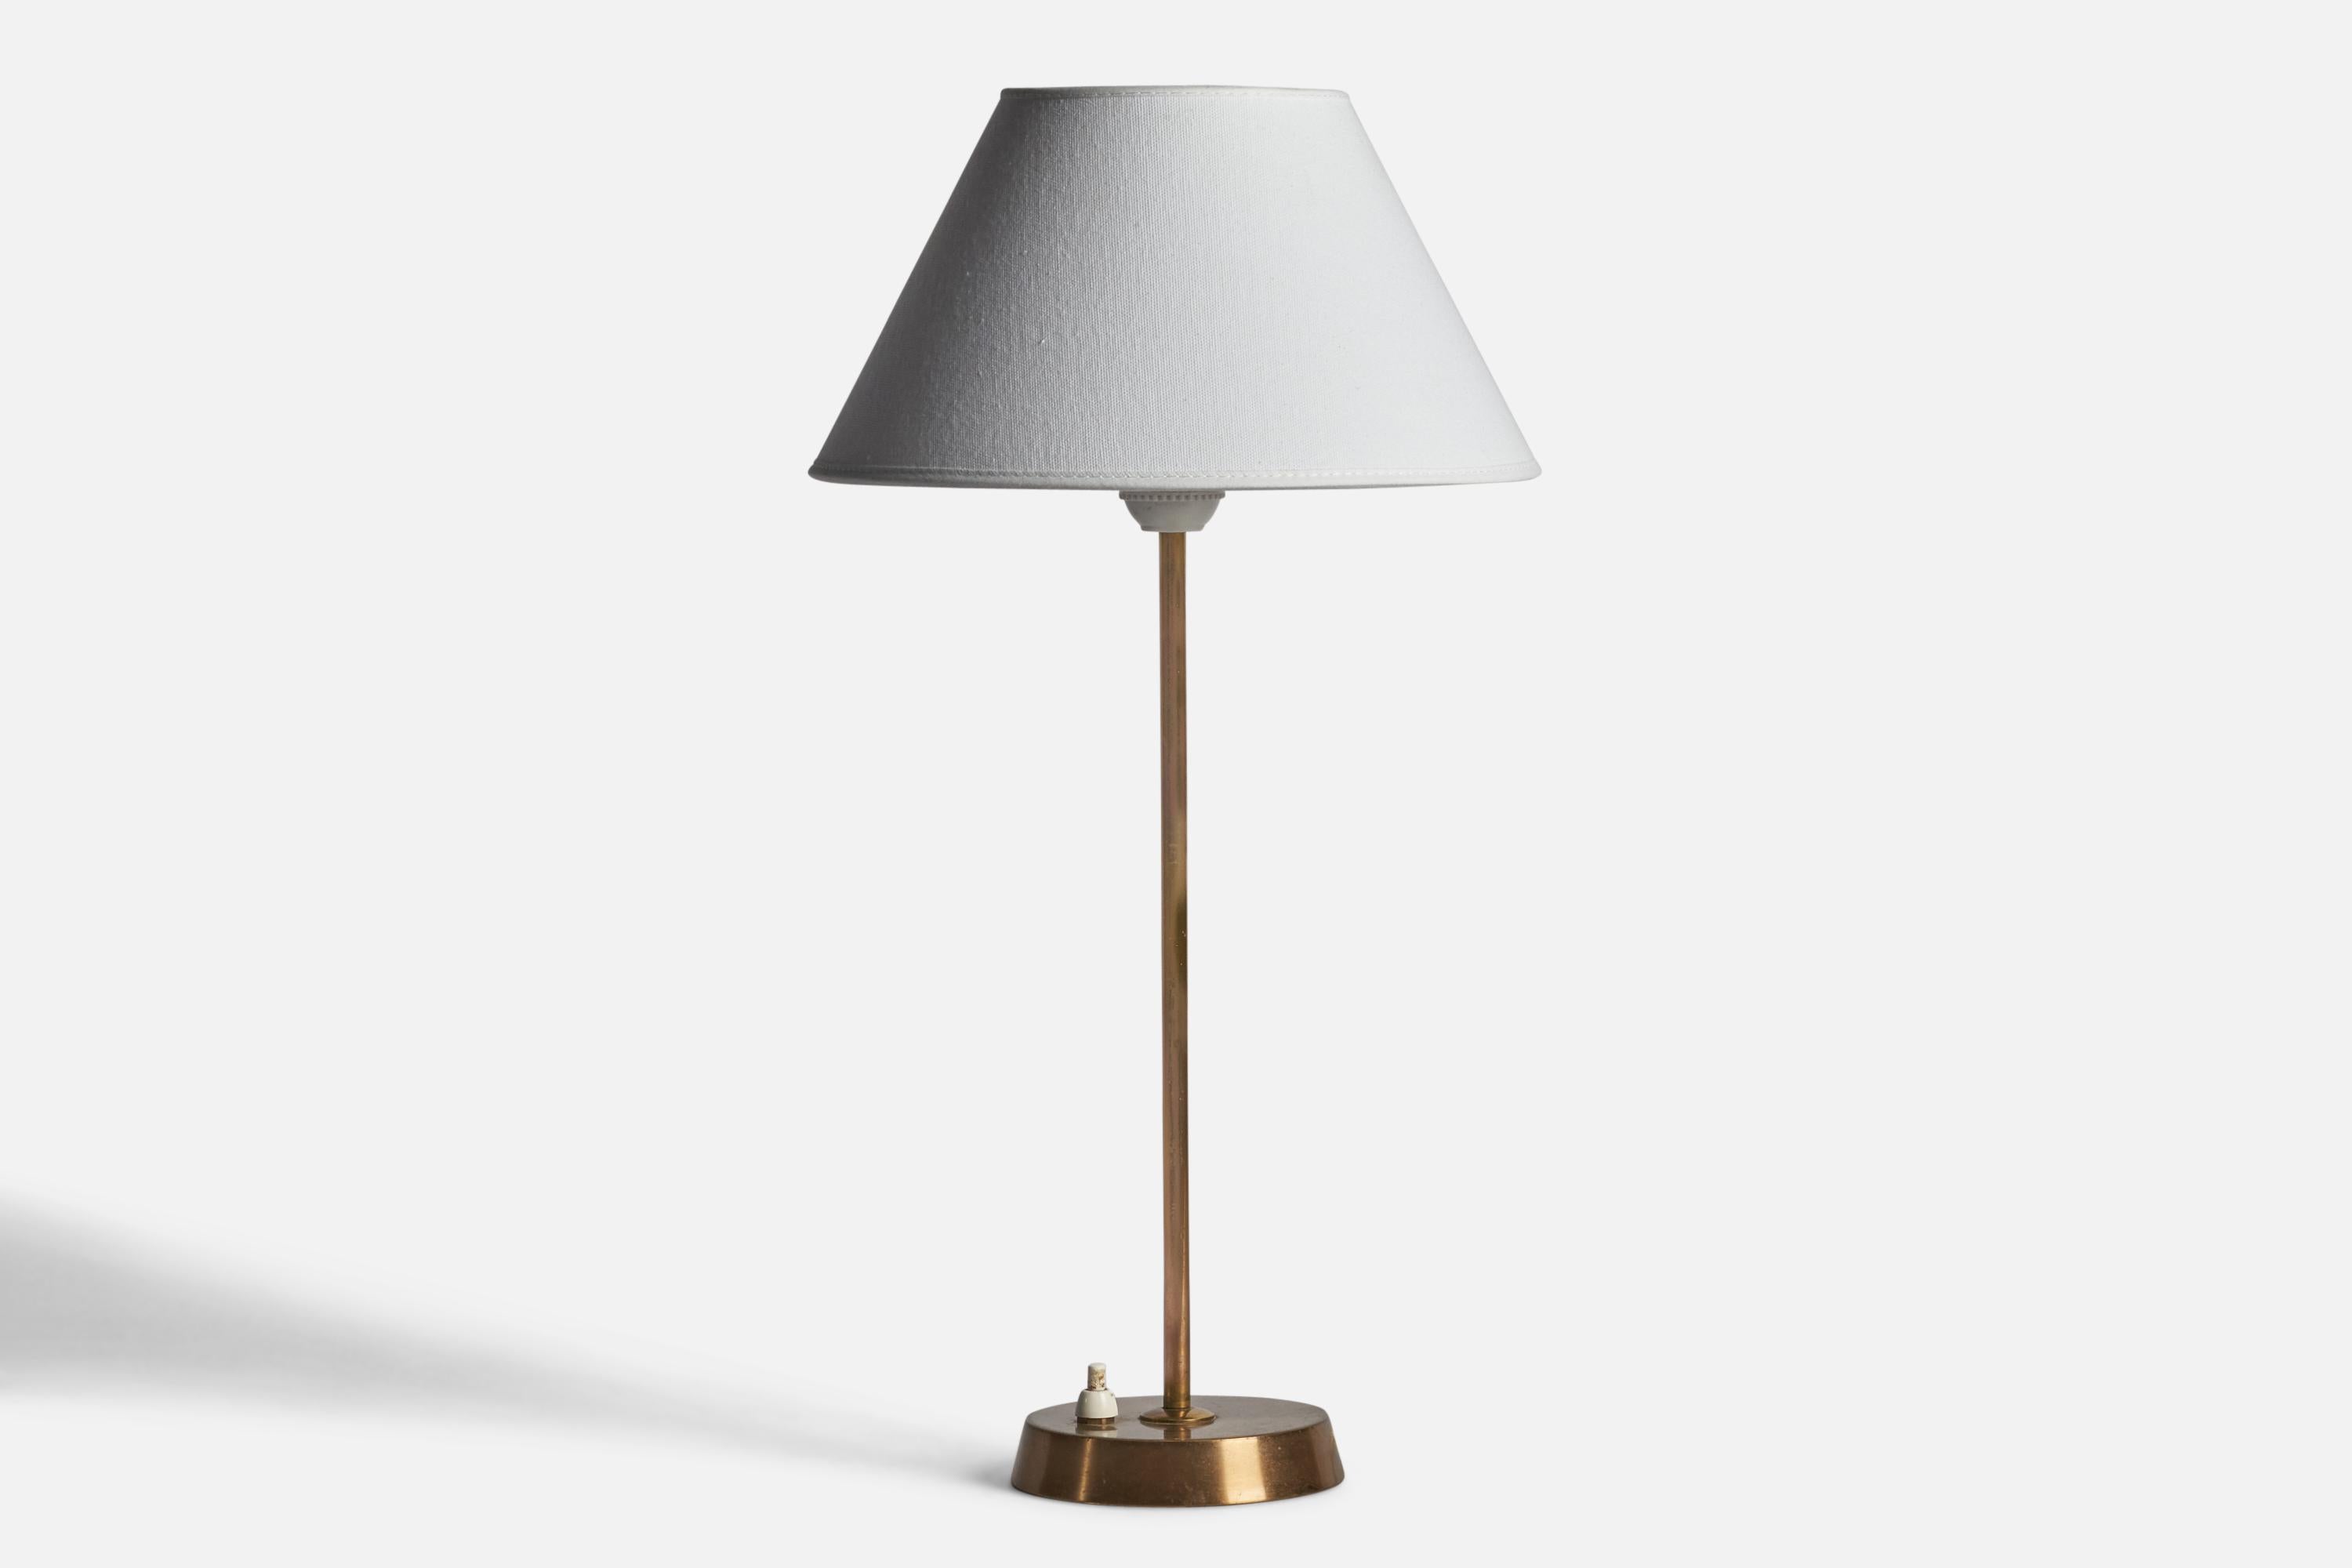 A brass table lamp designed and produced by EAE, Sweden, 1950s.

Dimensions of Lamp (inches): 15.45” H x 4.5” Diameter
Dimensions of Shade (inches): 7” Top Diameter x 10” Bottom Diameter x 5.5” H 
Dimensions of Lamp with Shade (inches): 18.35” H x